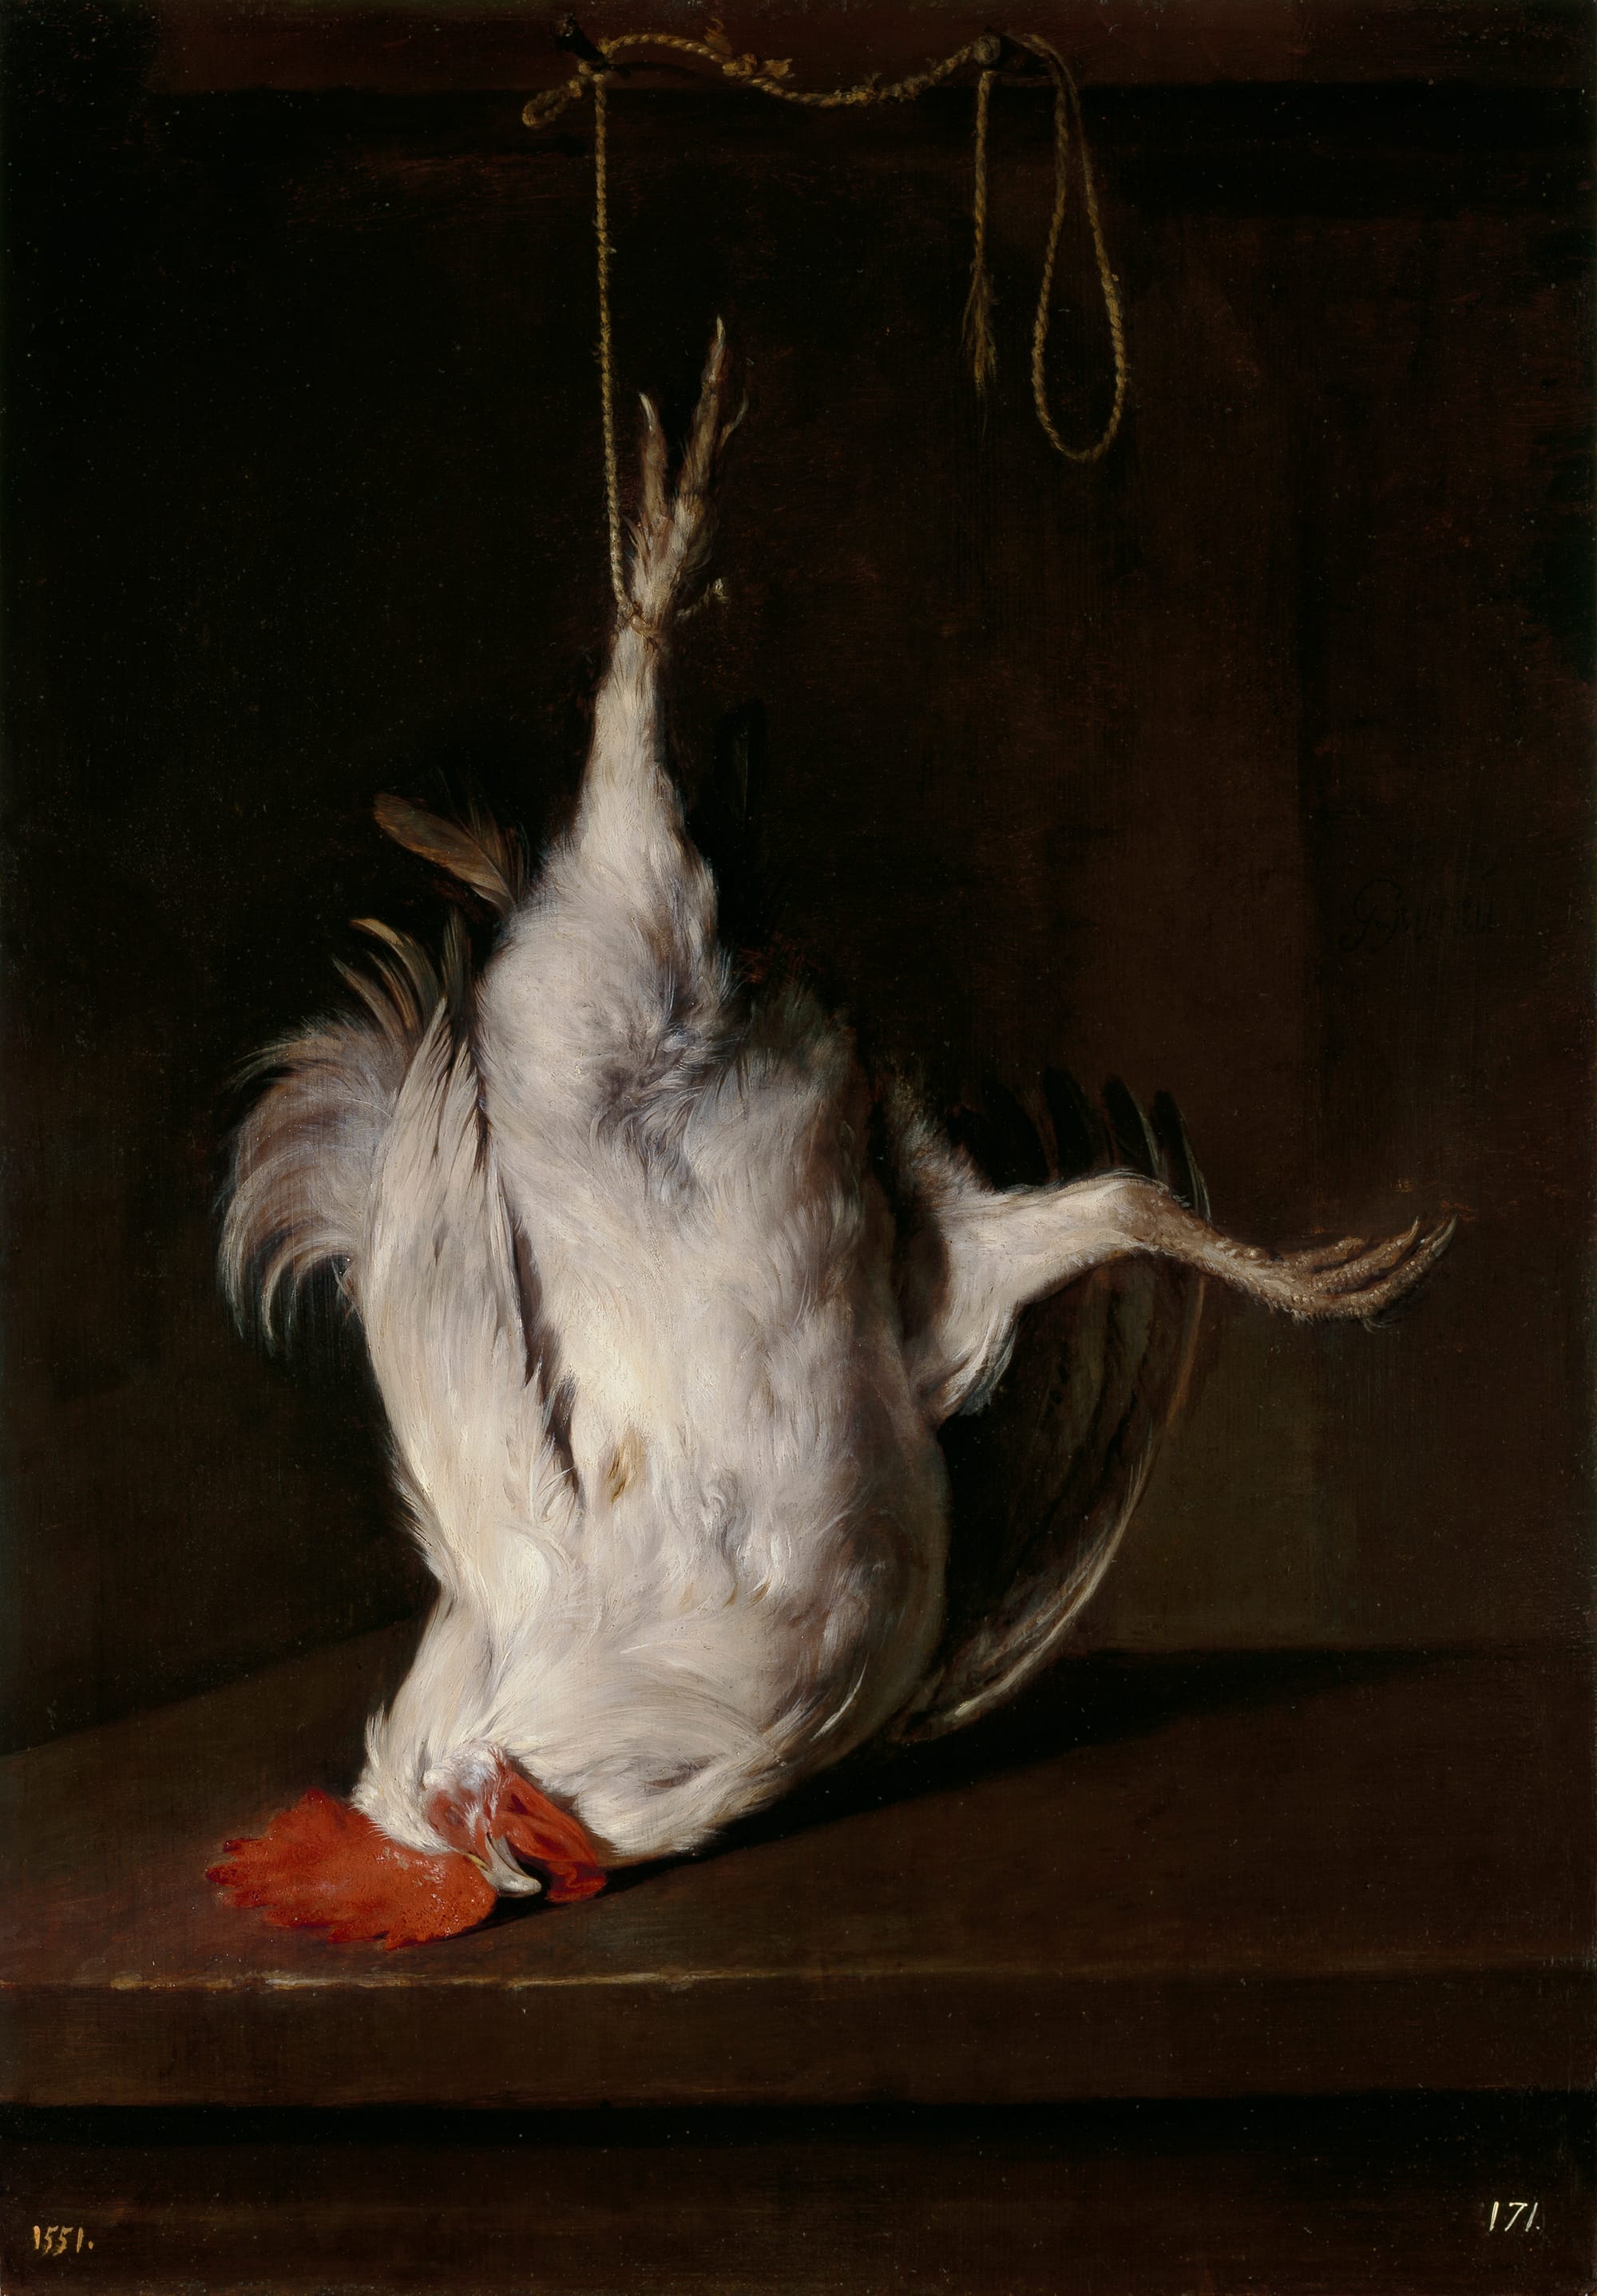 Dead Cock (1650) by Gabriël Metsu, a weirdly gorgeous painting of a dead rooster hanging by one leg from a cord